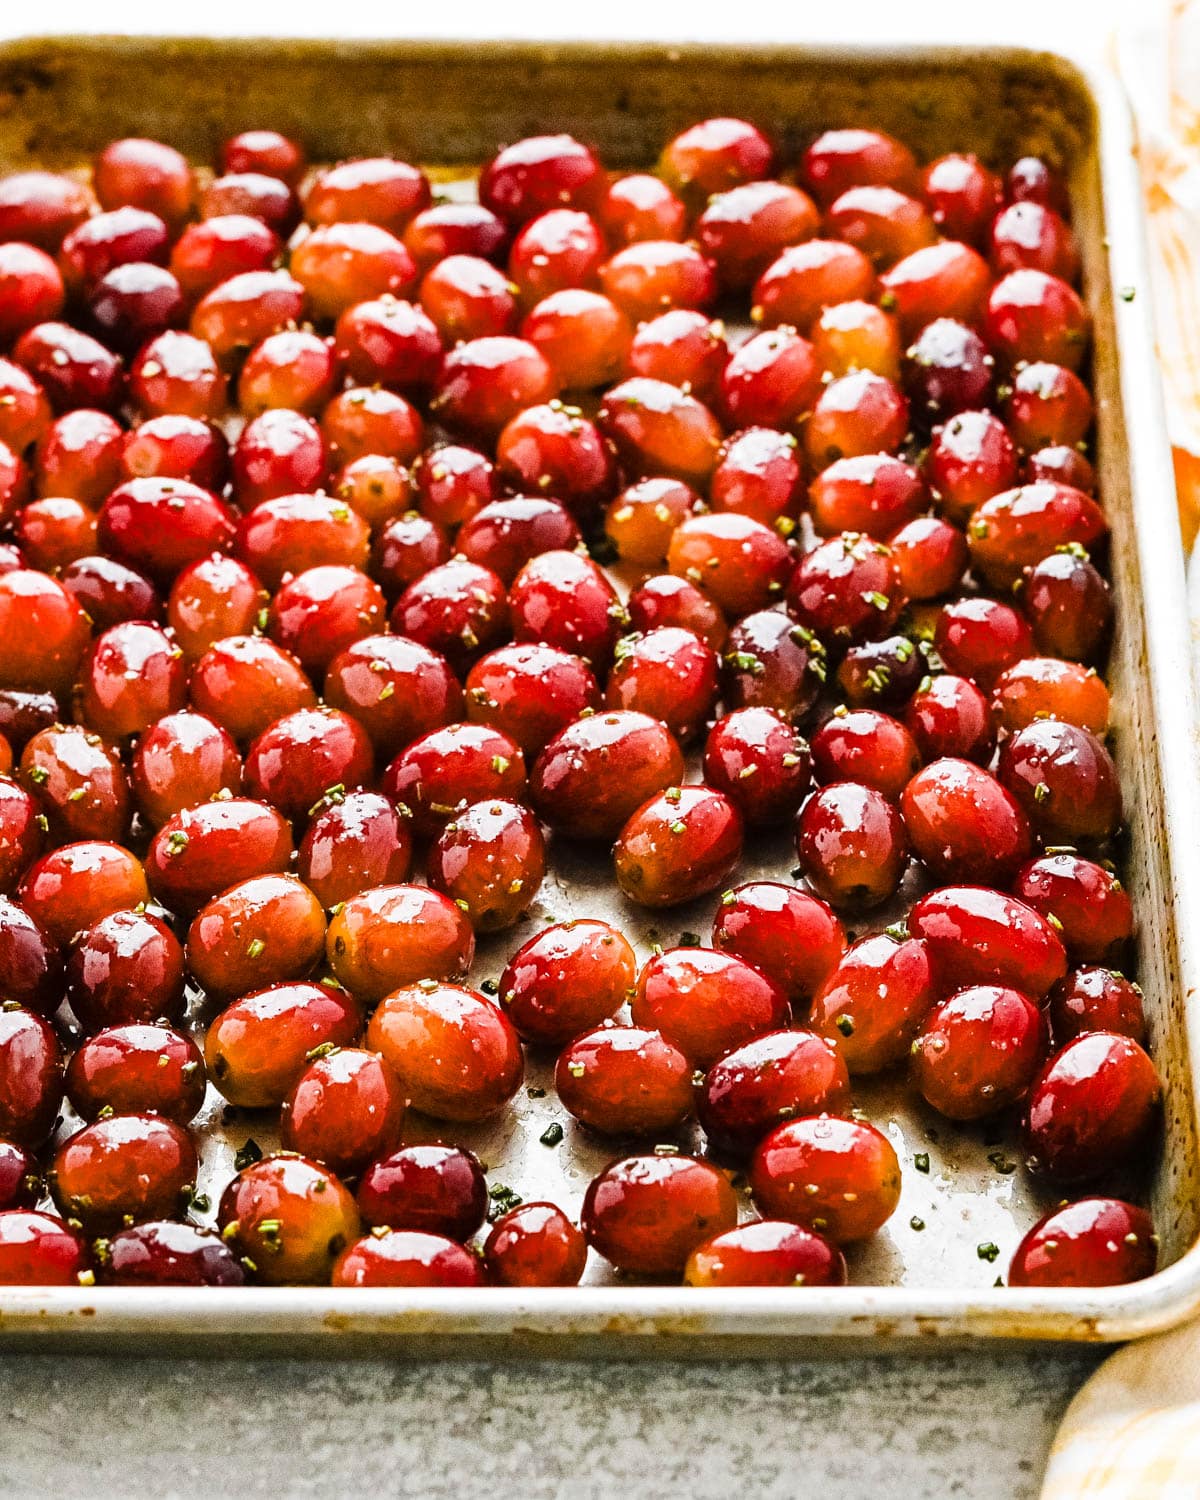 Roasting grapes on a sheet pan with oil and rosemary.